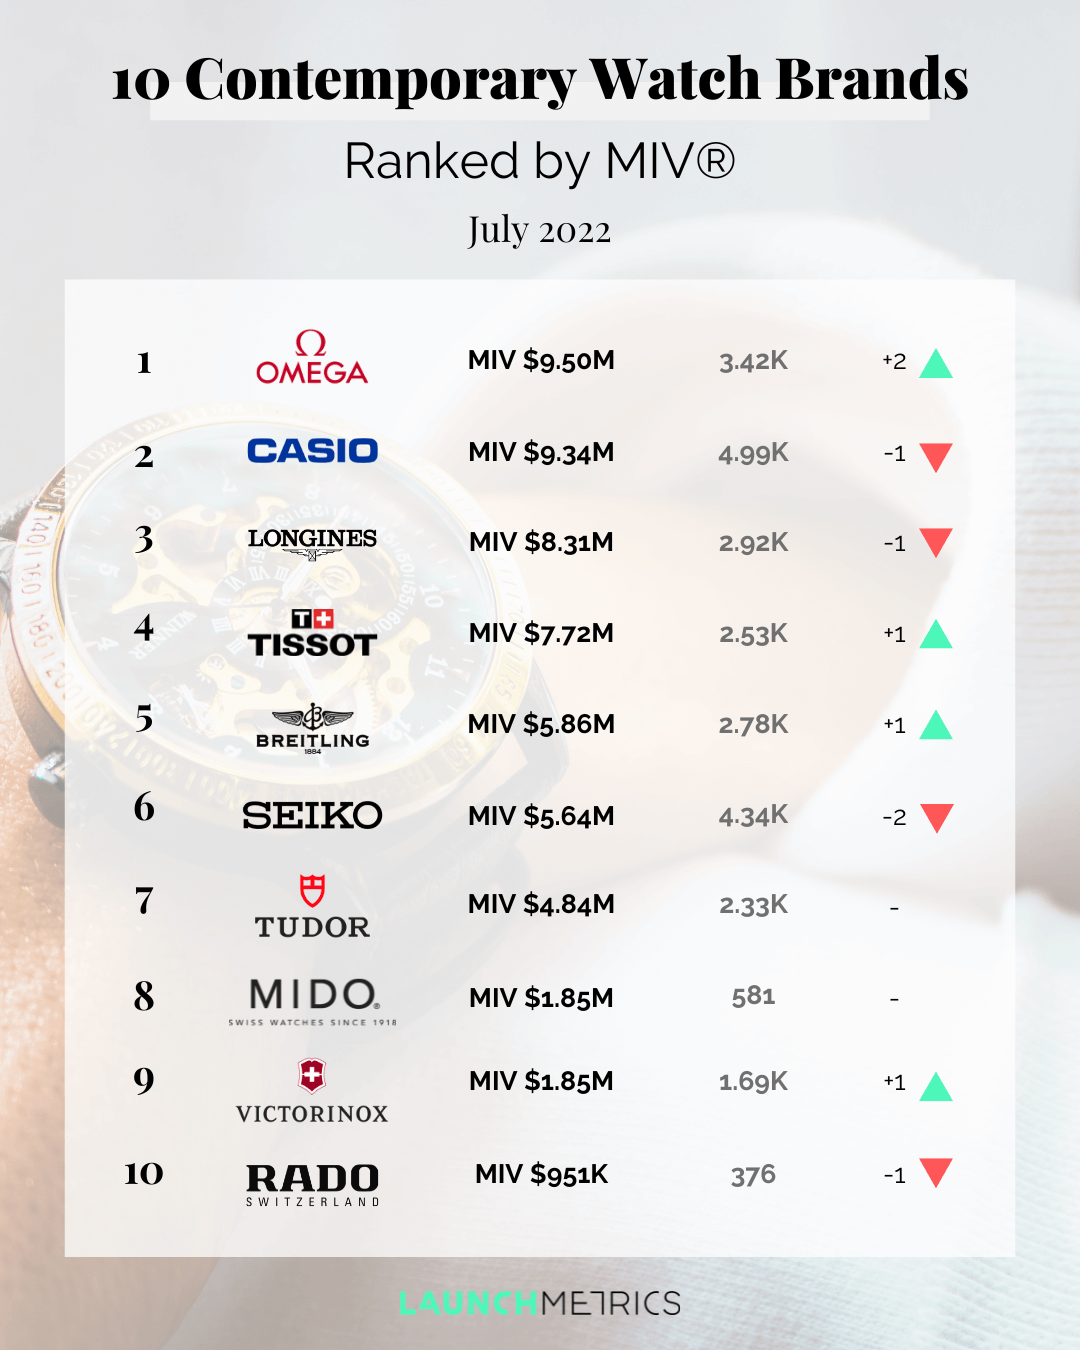 The Few Big Companies That Own Most Of The Major Luxury Watch Brands